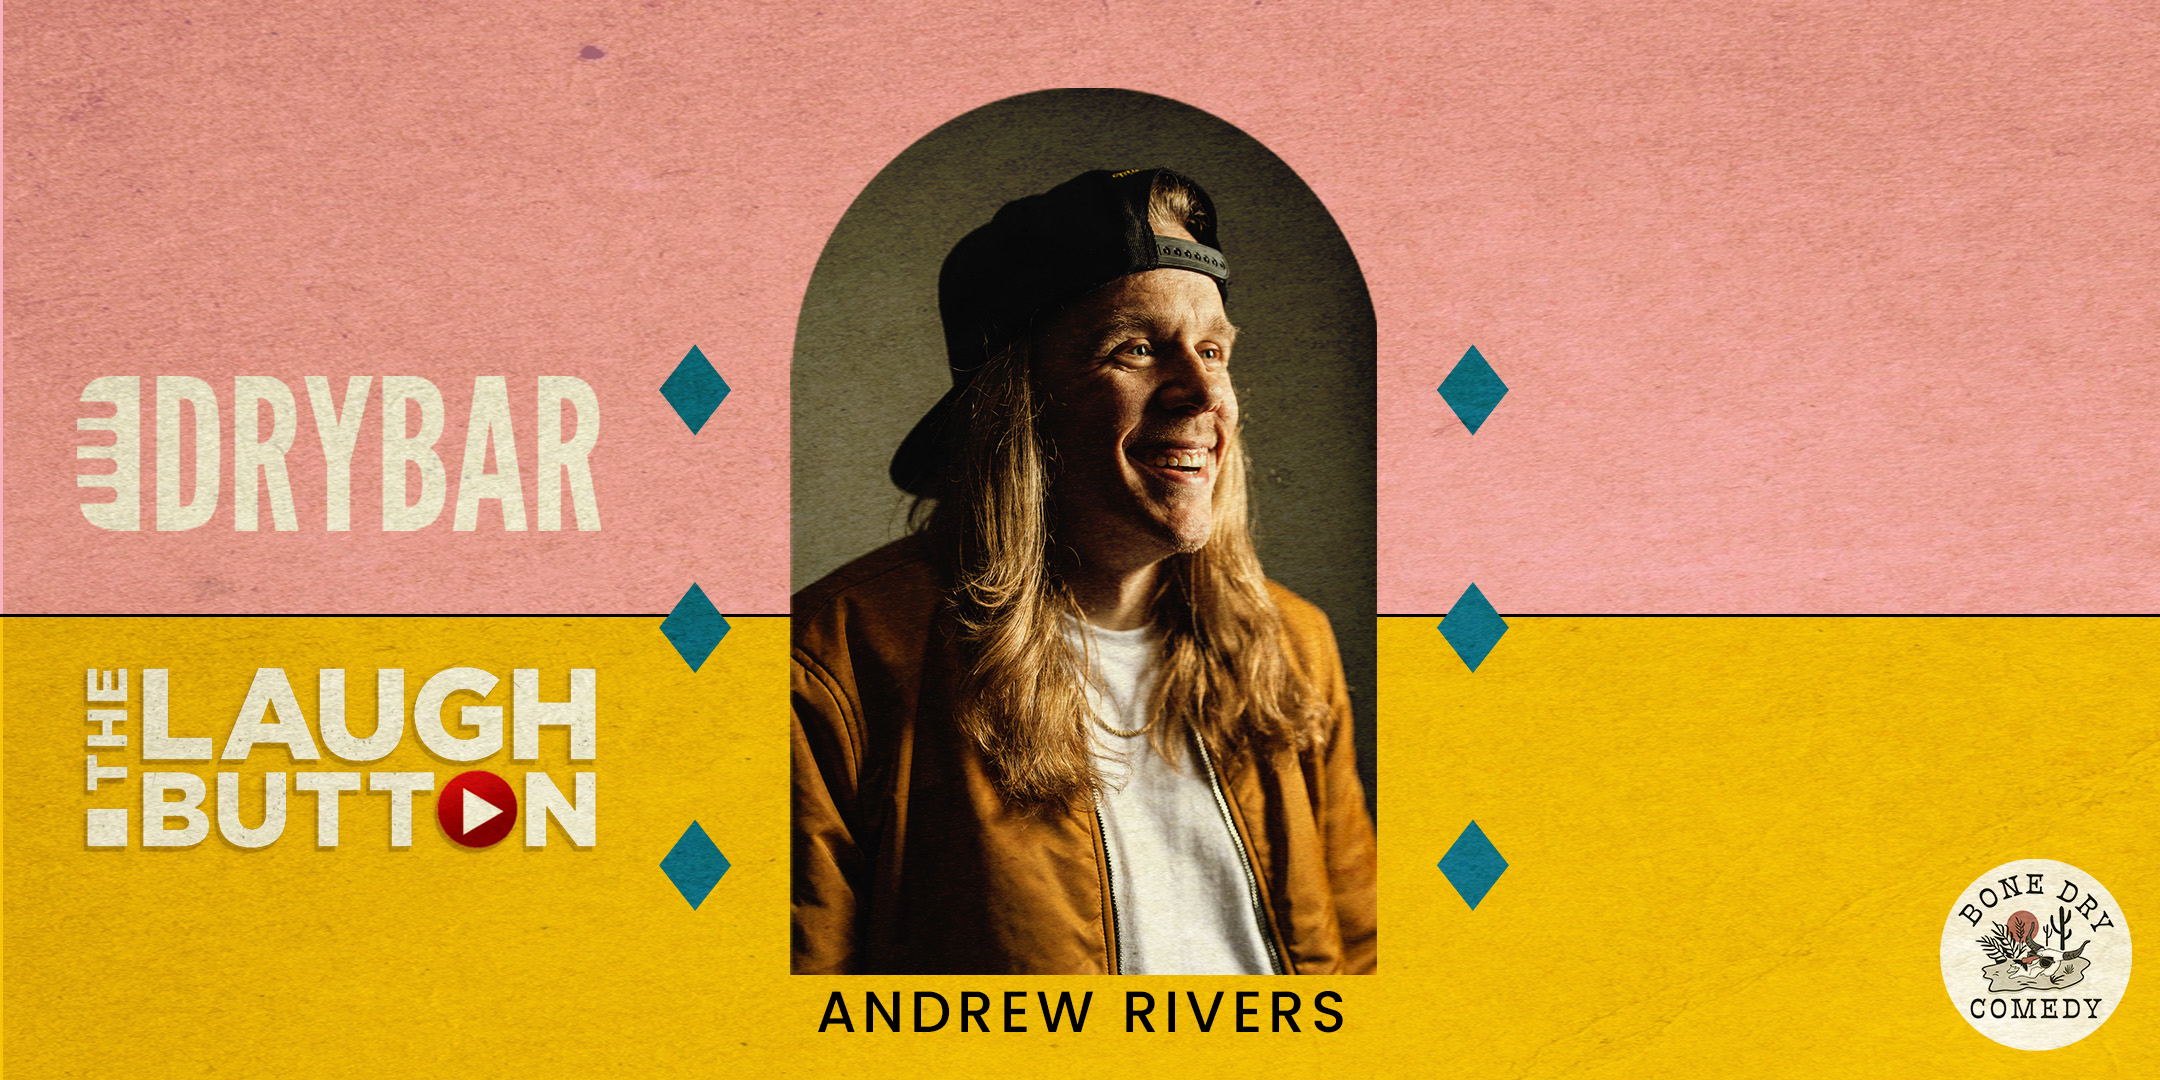 Andrew Rivers Comedy at Ole Beck VFW Post 209 in Downtown Missoula on Saturday, March 25, 2023